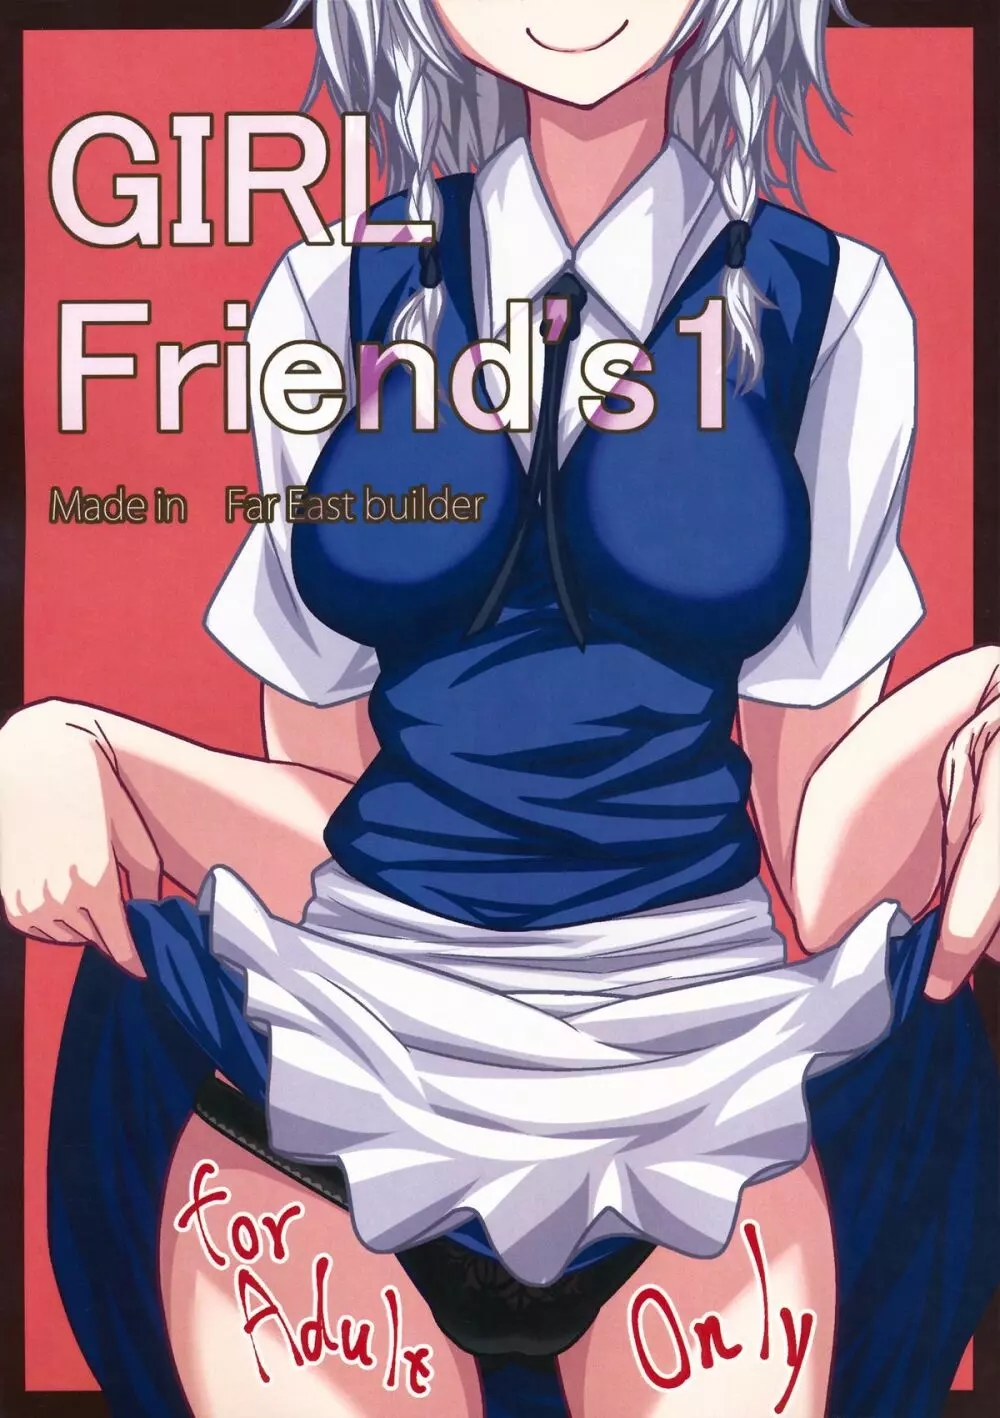 GIRL Friend’s 1 - page1